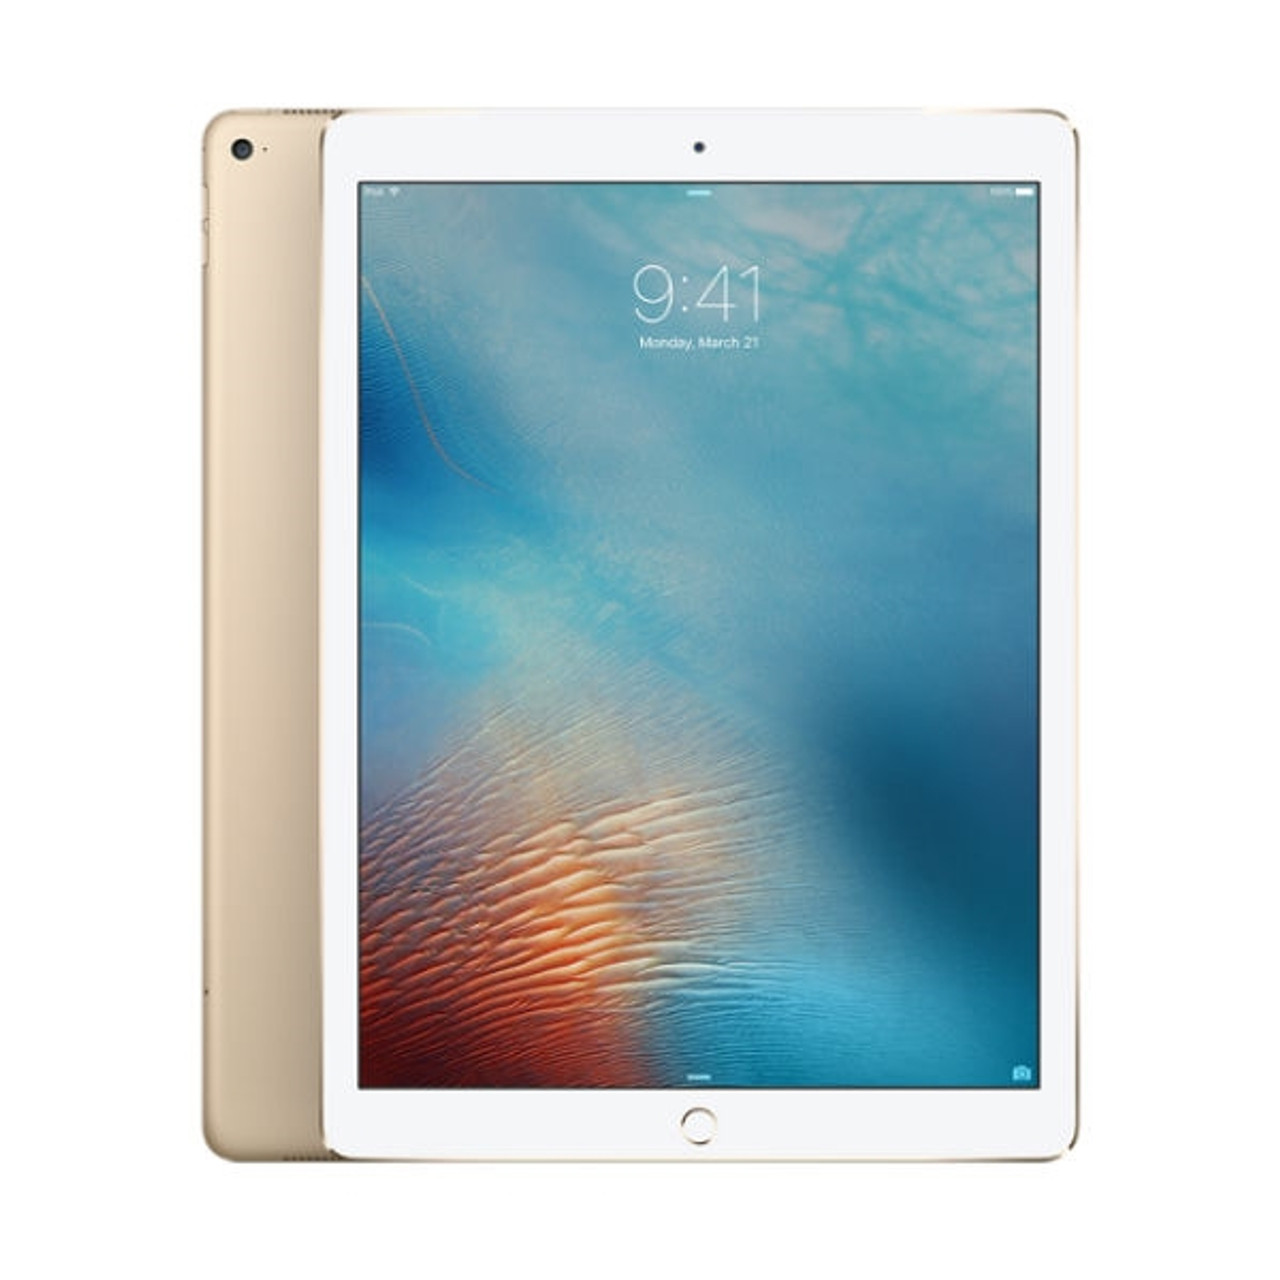 Apple iPad Pro (2nd generation) 12.9-inch Wi-Fi + Cellular 256GB - Gold  MPA62LL/A - Very Good Condition*